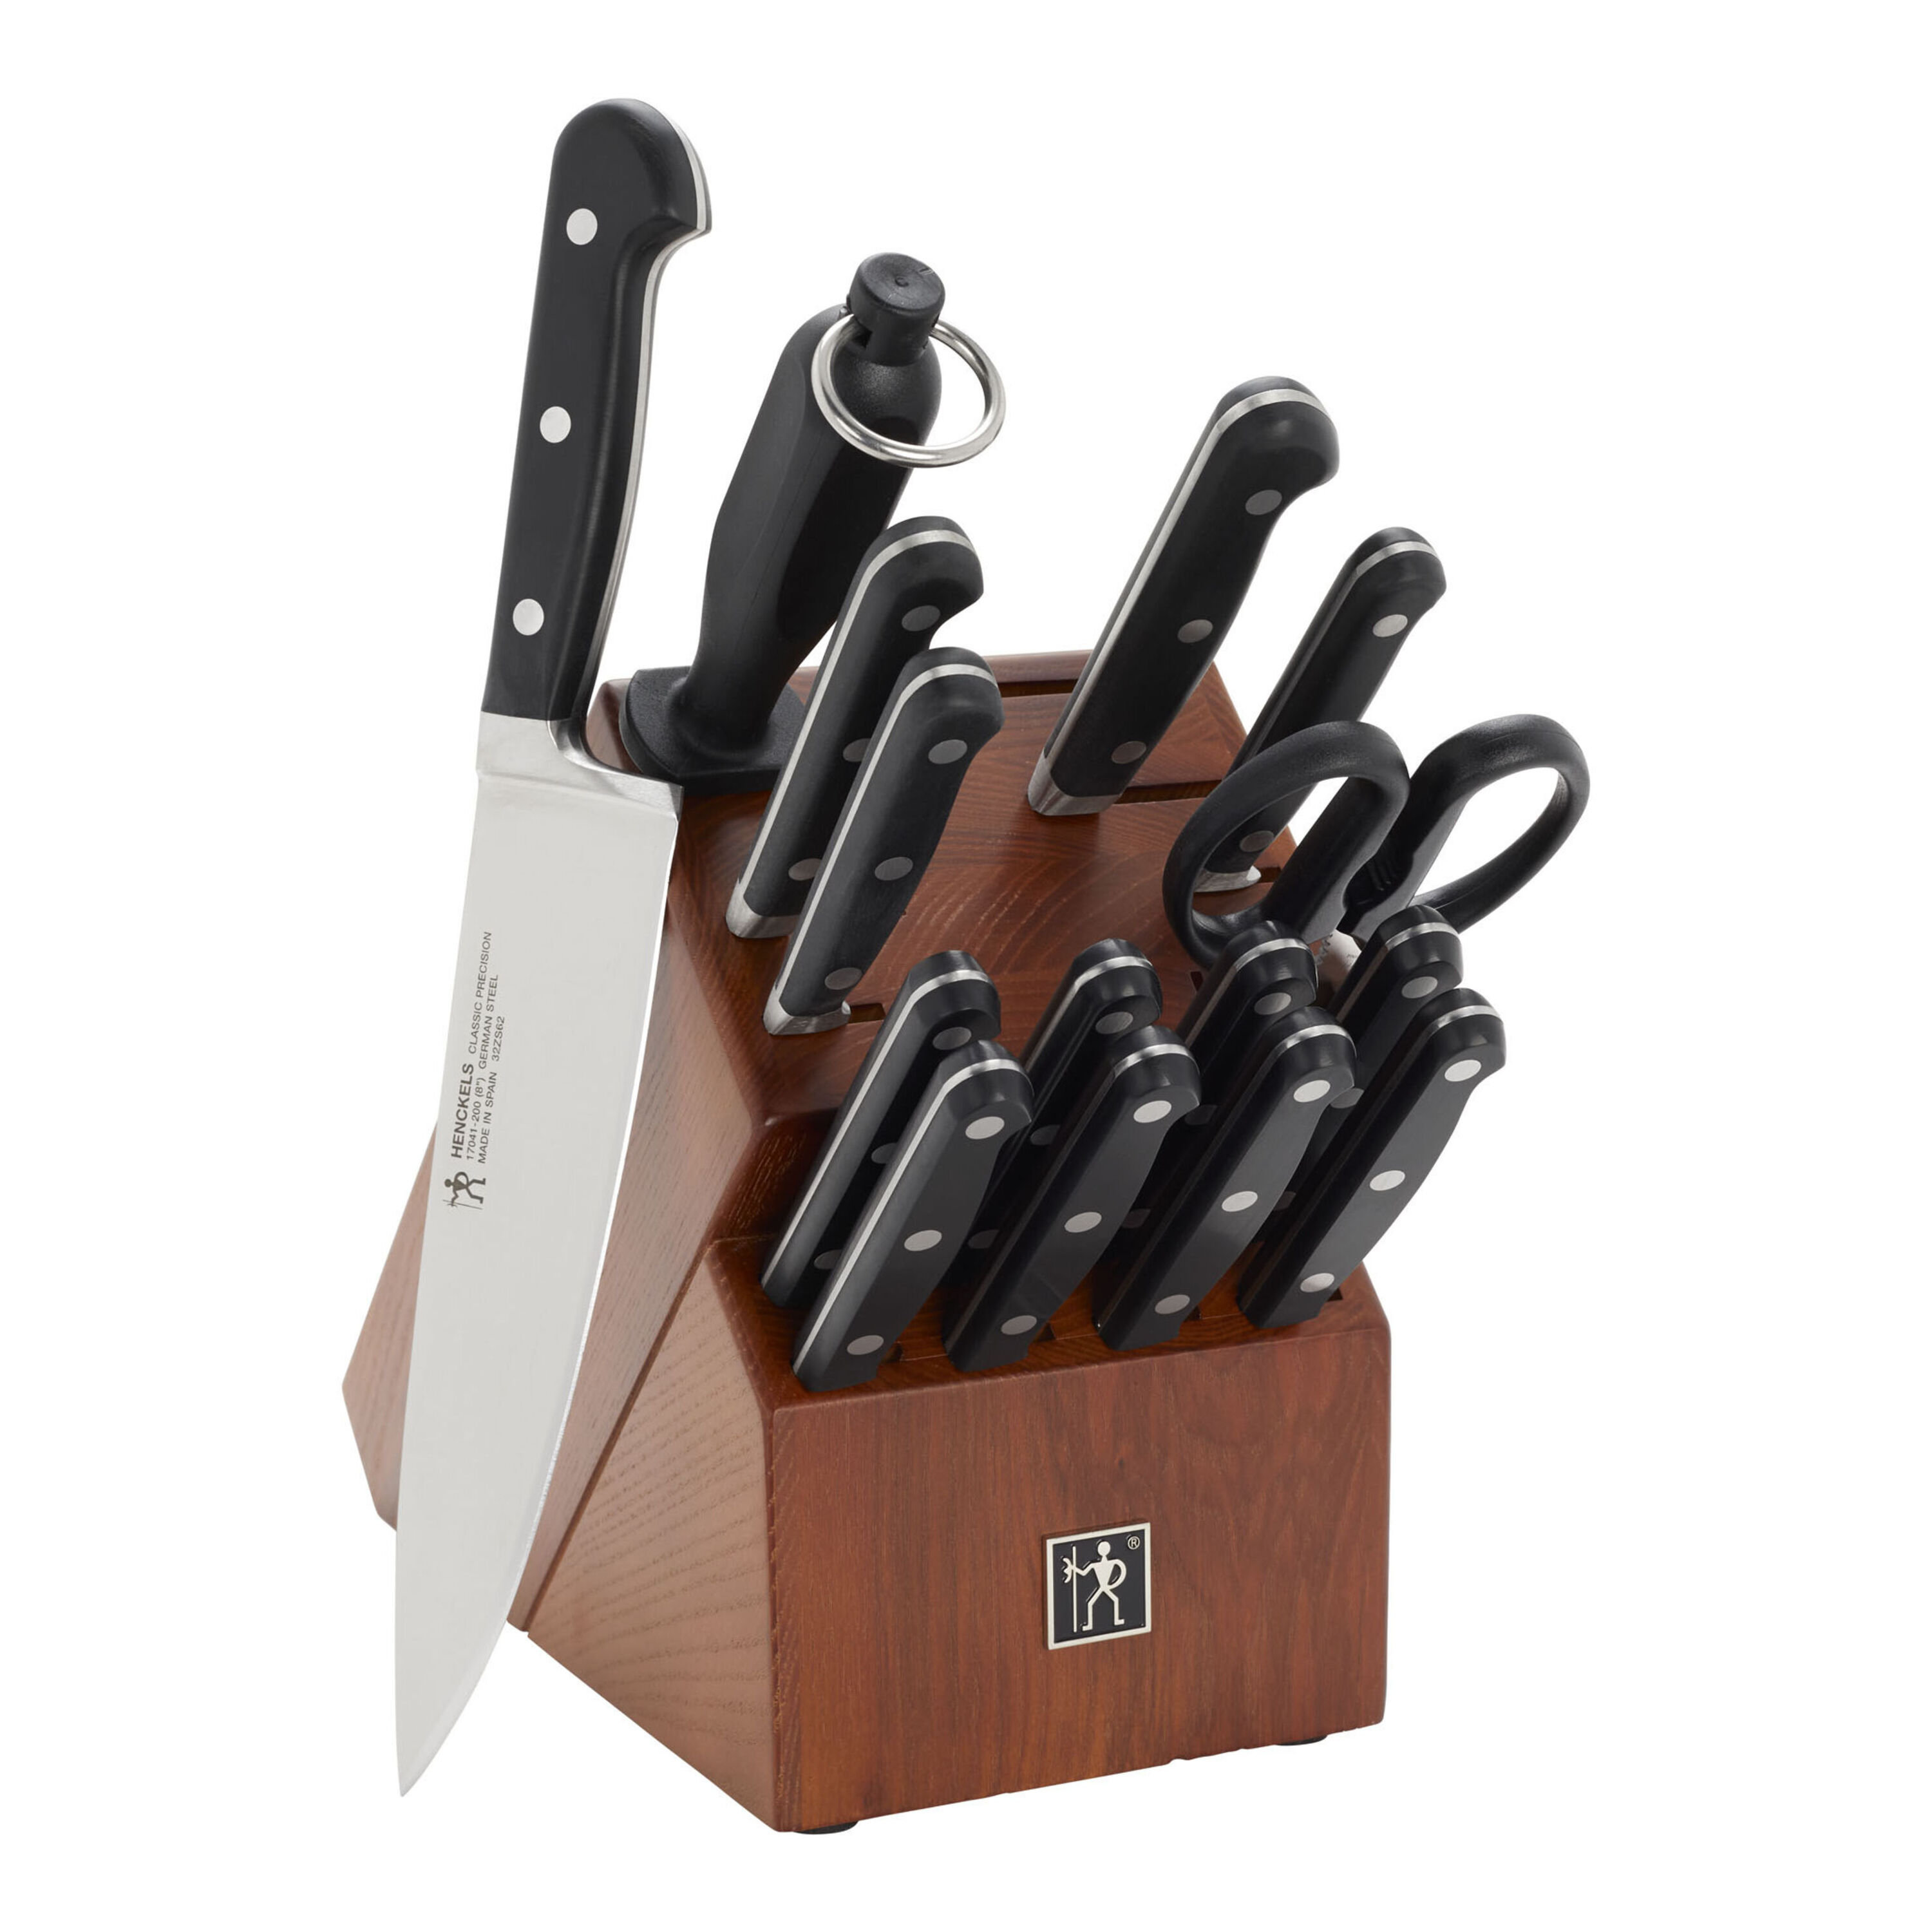 Kitchen Knife Set, 15 Piece Knife Sets with Block, Chef Knives with  Non-Slip Ger